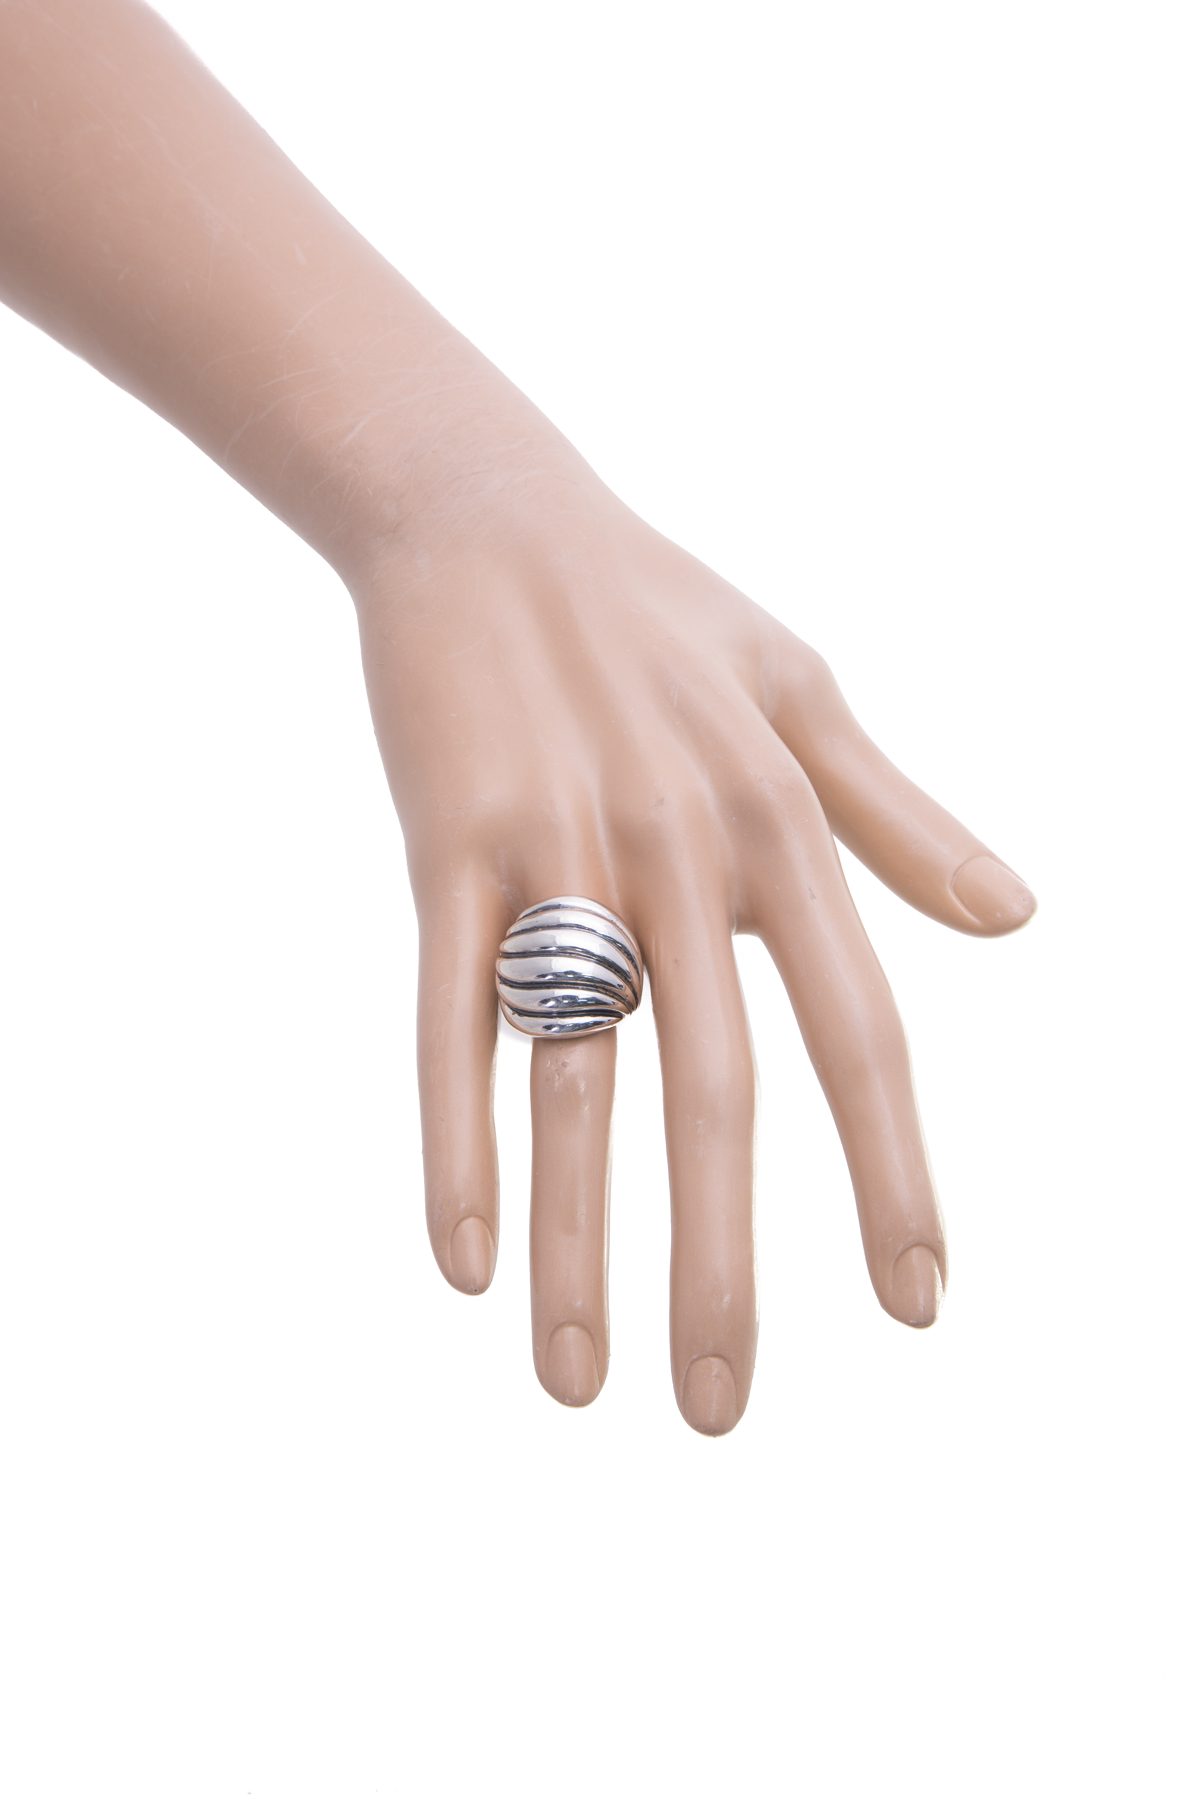 David Yurman Sculpted Cable Dome Ring - Size 7